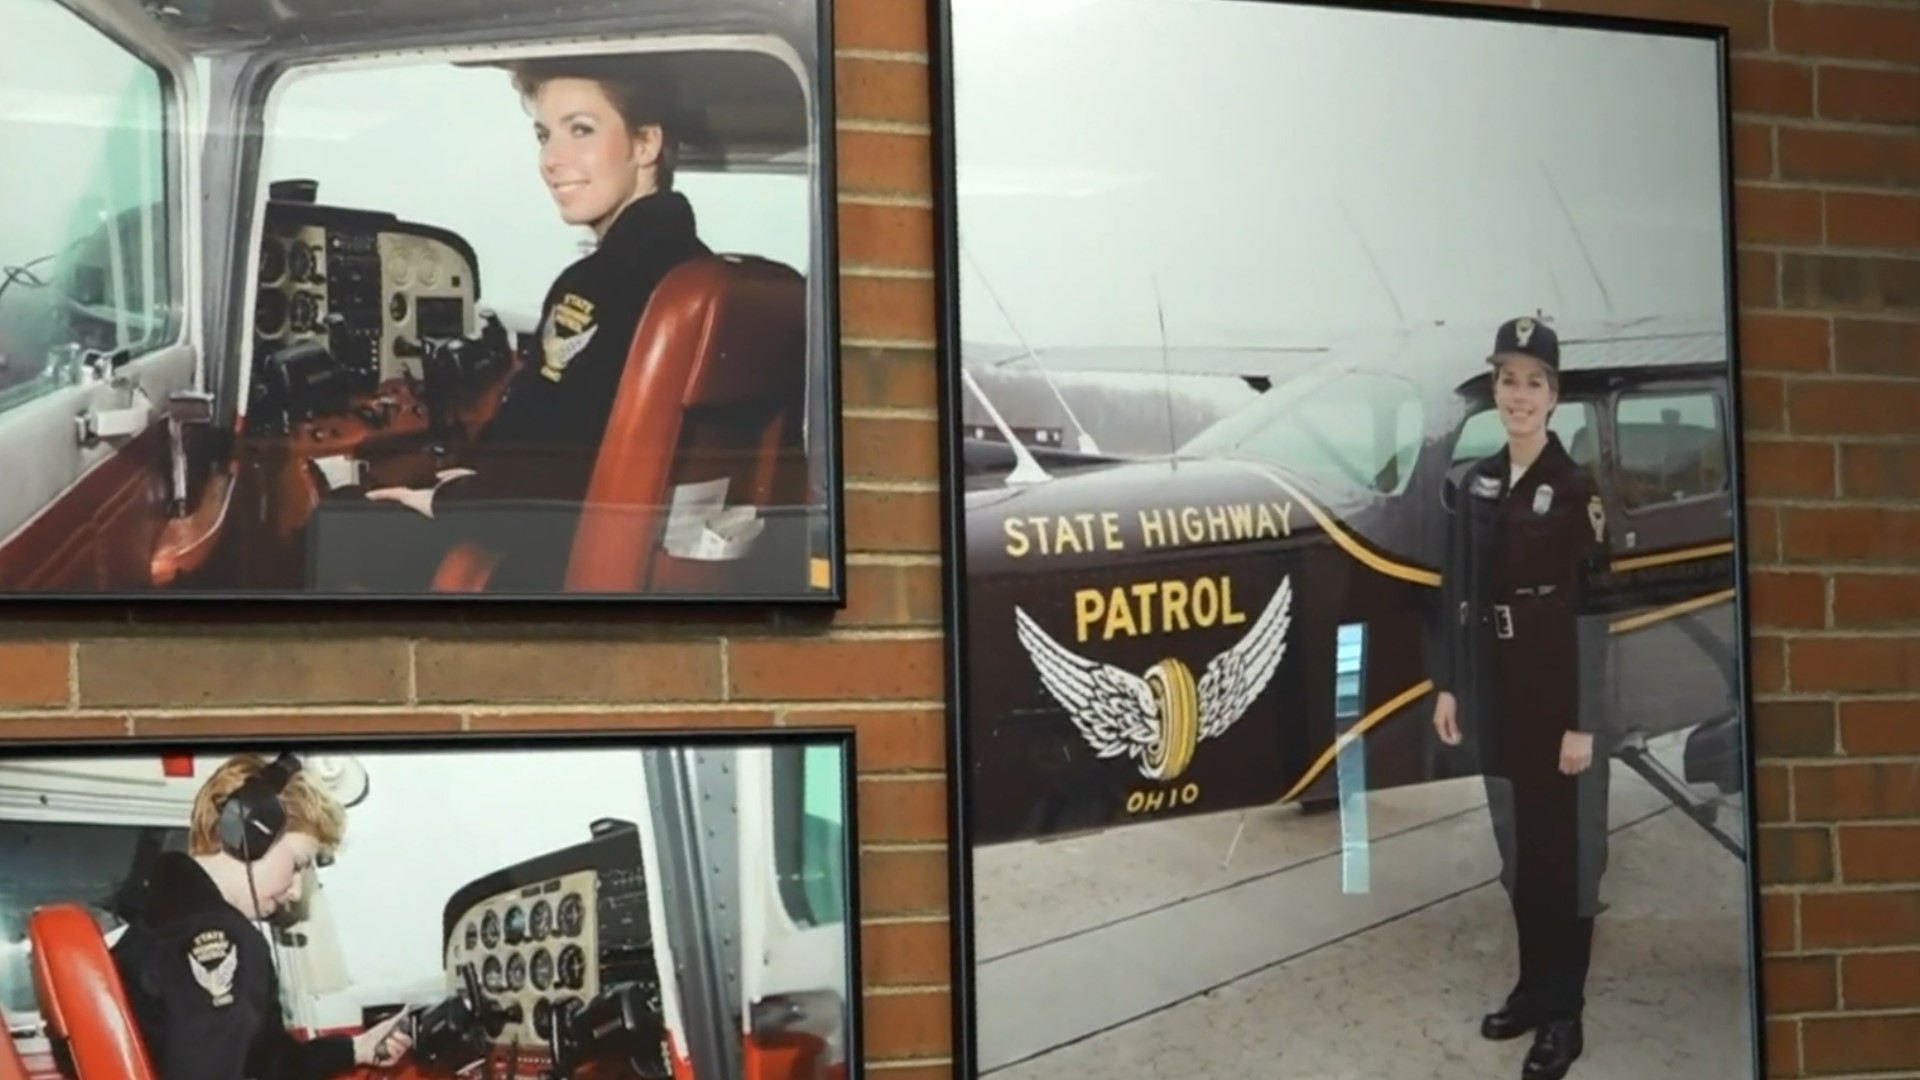 The Ohio State Highway Patrol is setting a goal to recruit more women to the department